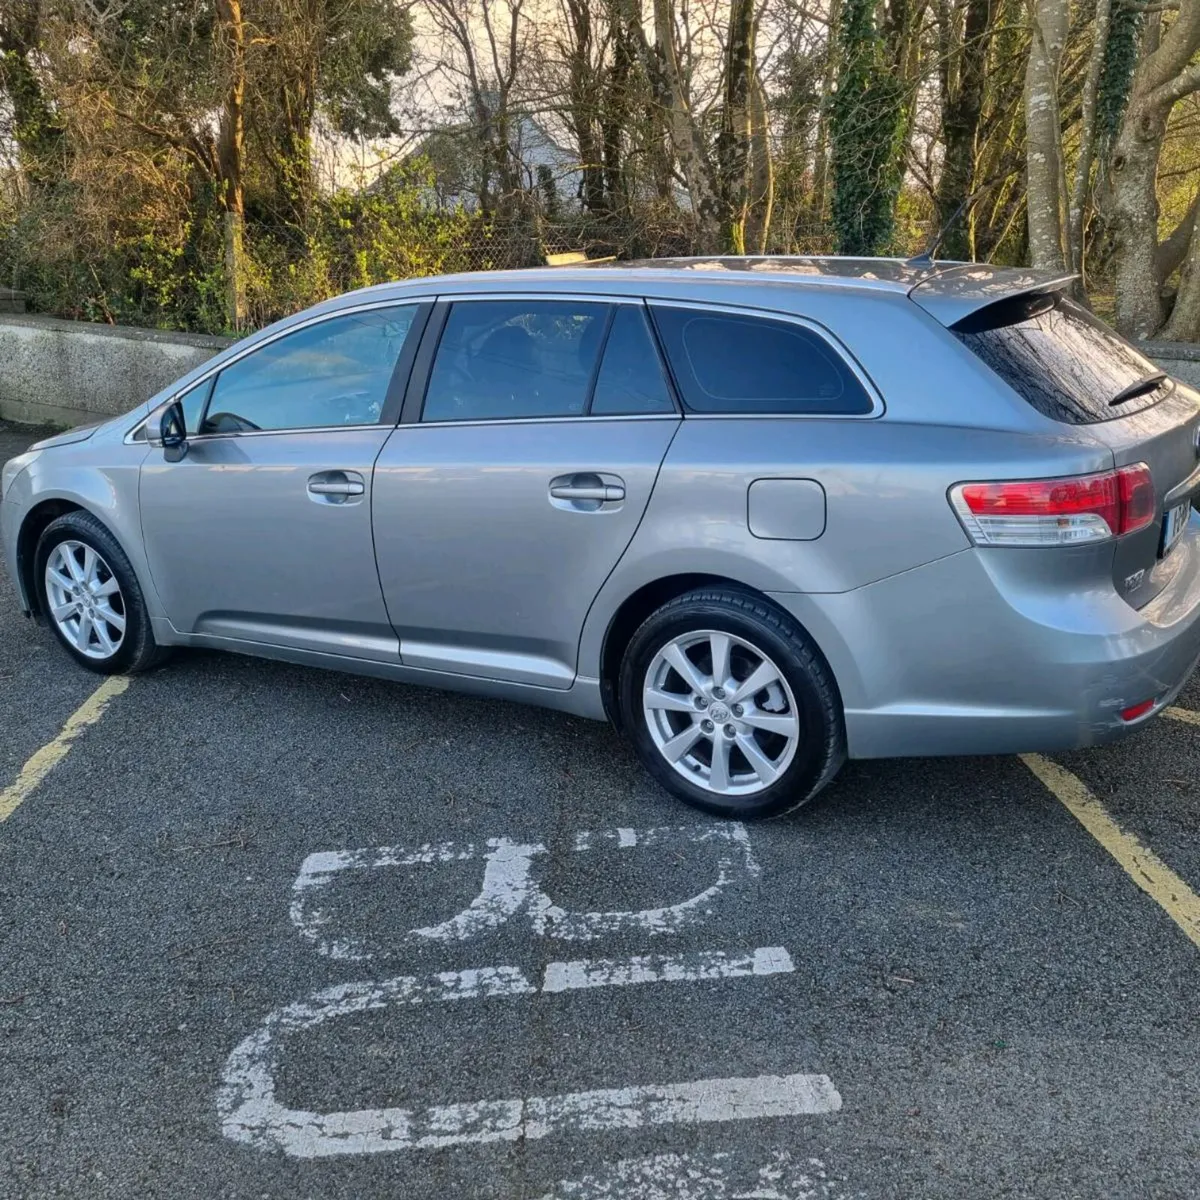 Toyota avensis estate - new nct 05/25 - Image 1